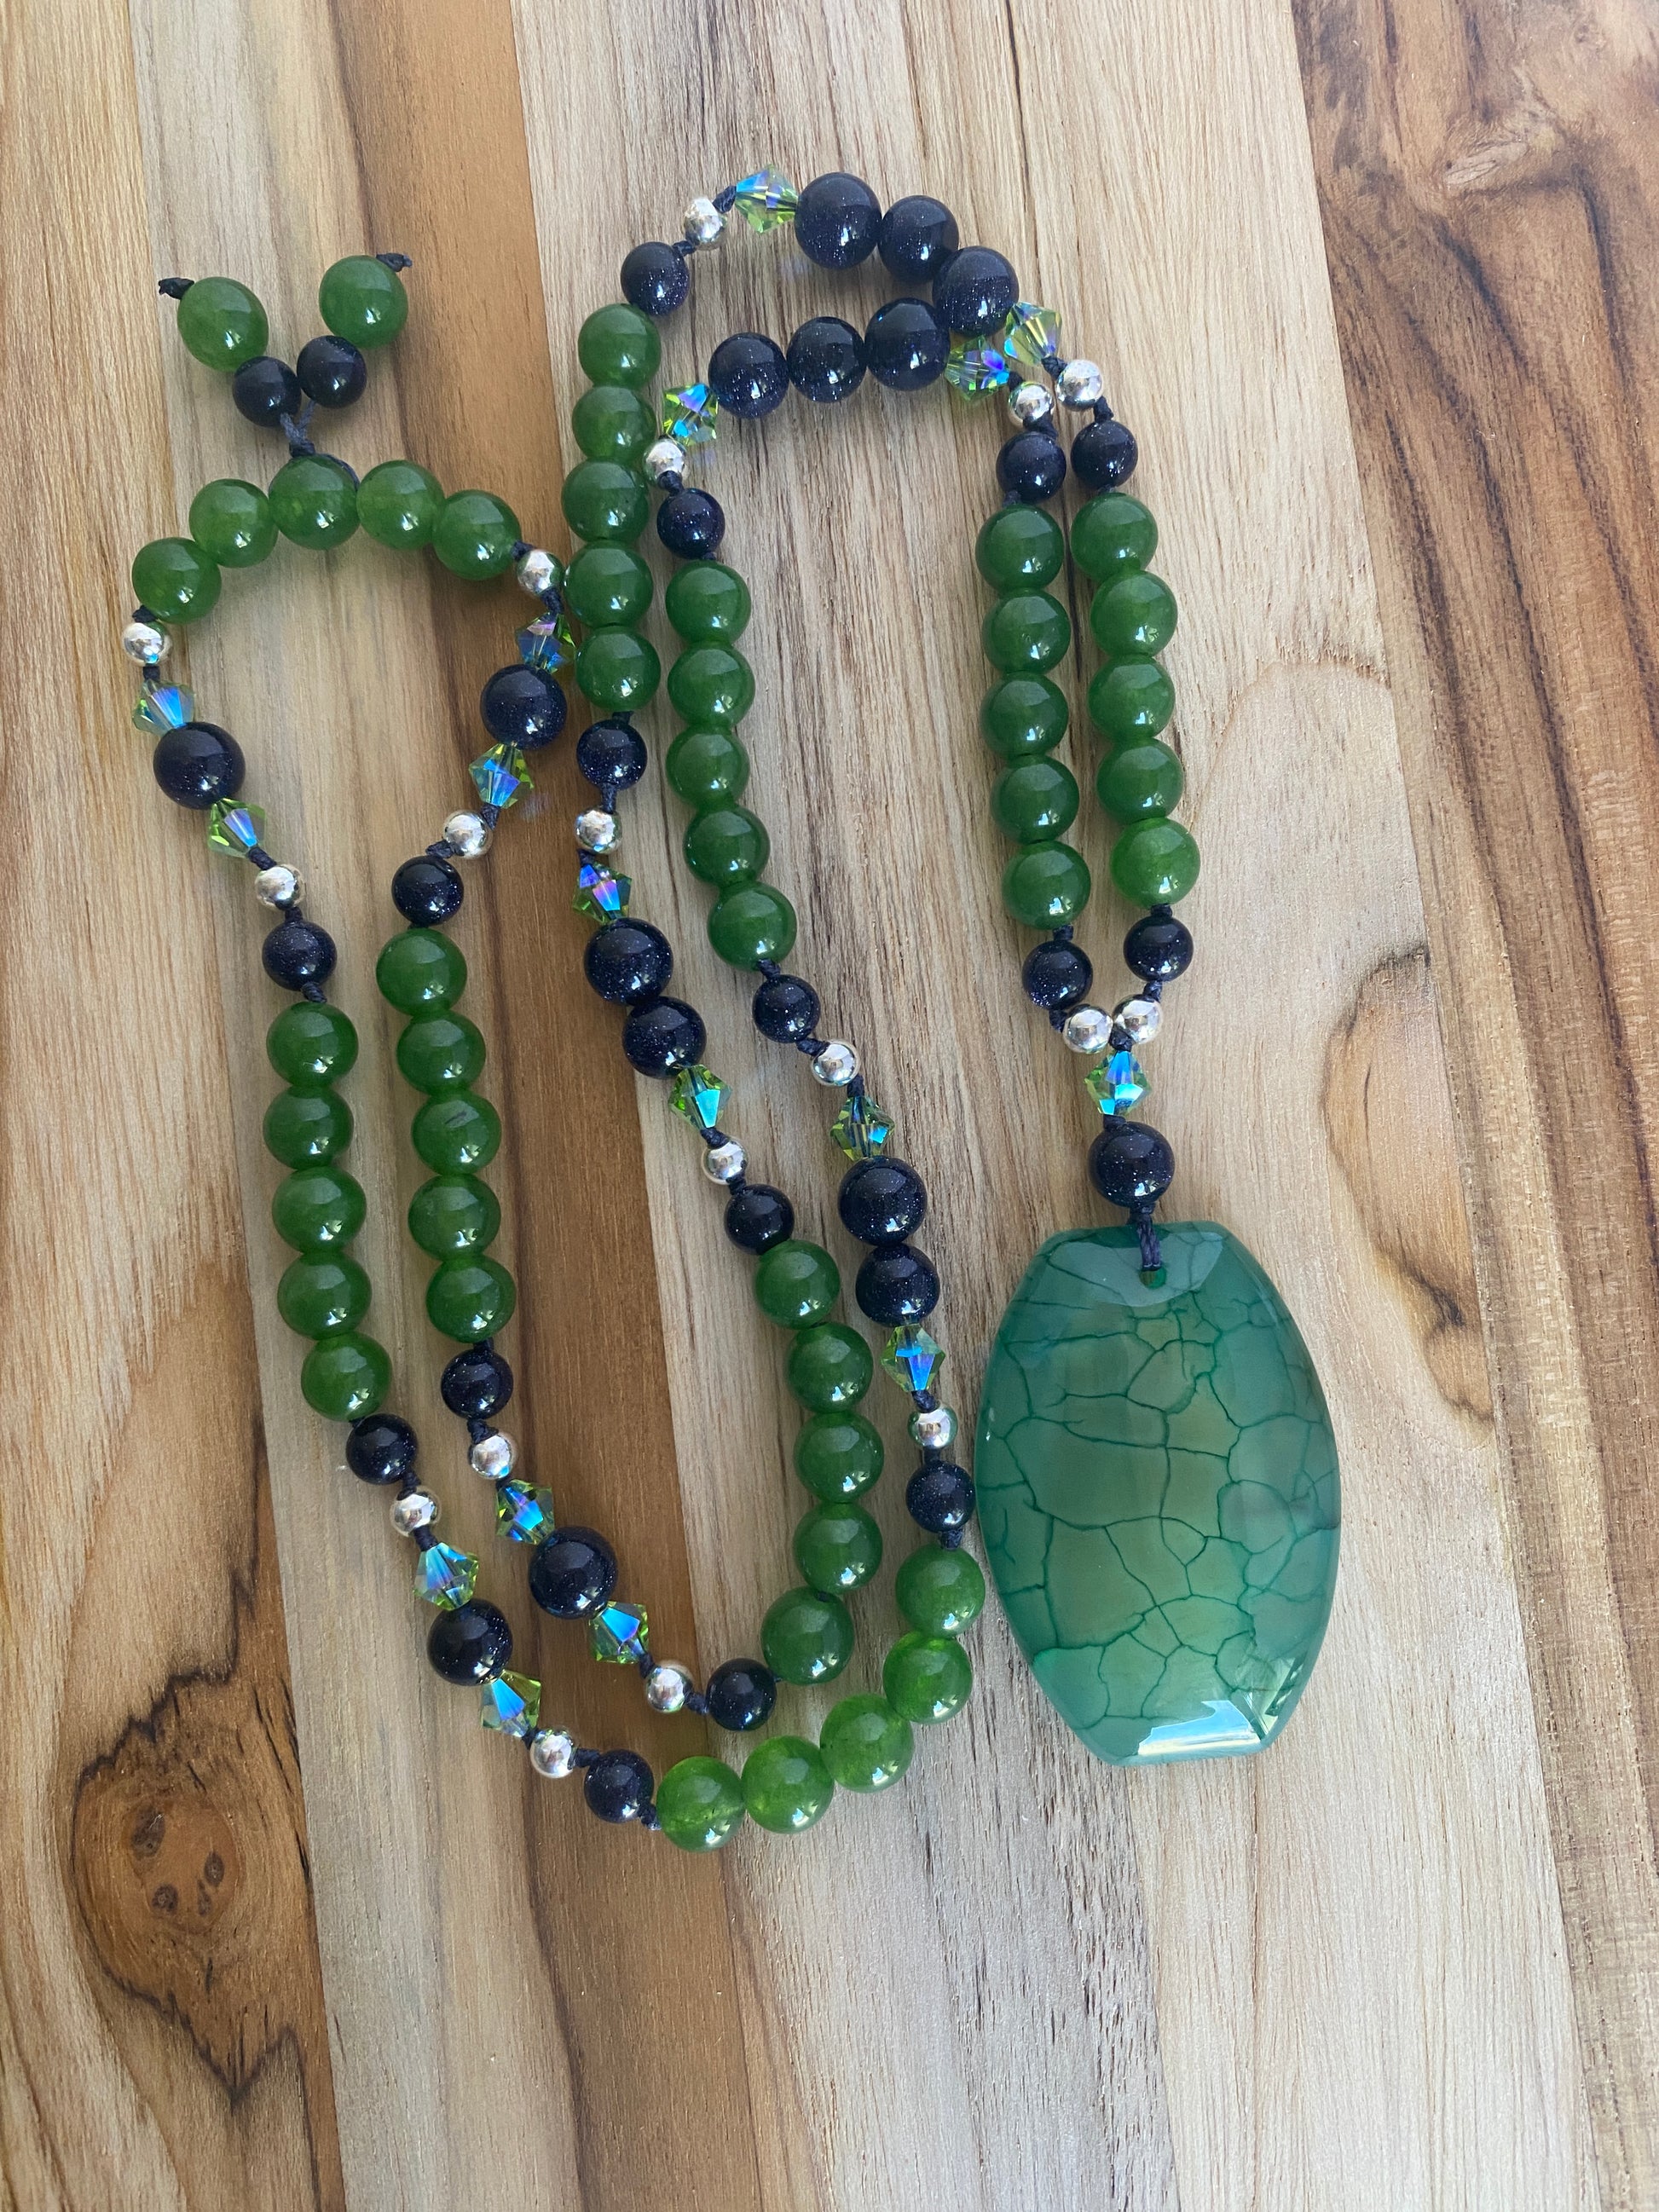 30" Green Agate Beaded Pendant Necklace with Blue Sandstone, Green Jade & Crystals - My Urban Gems